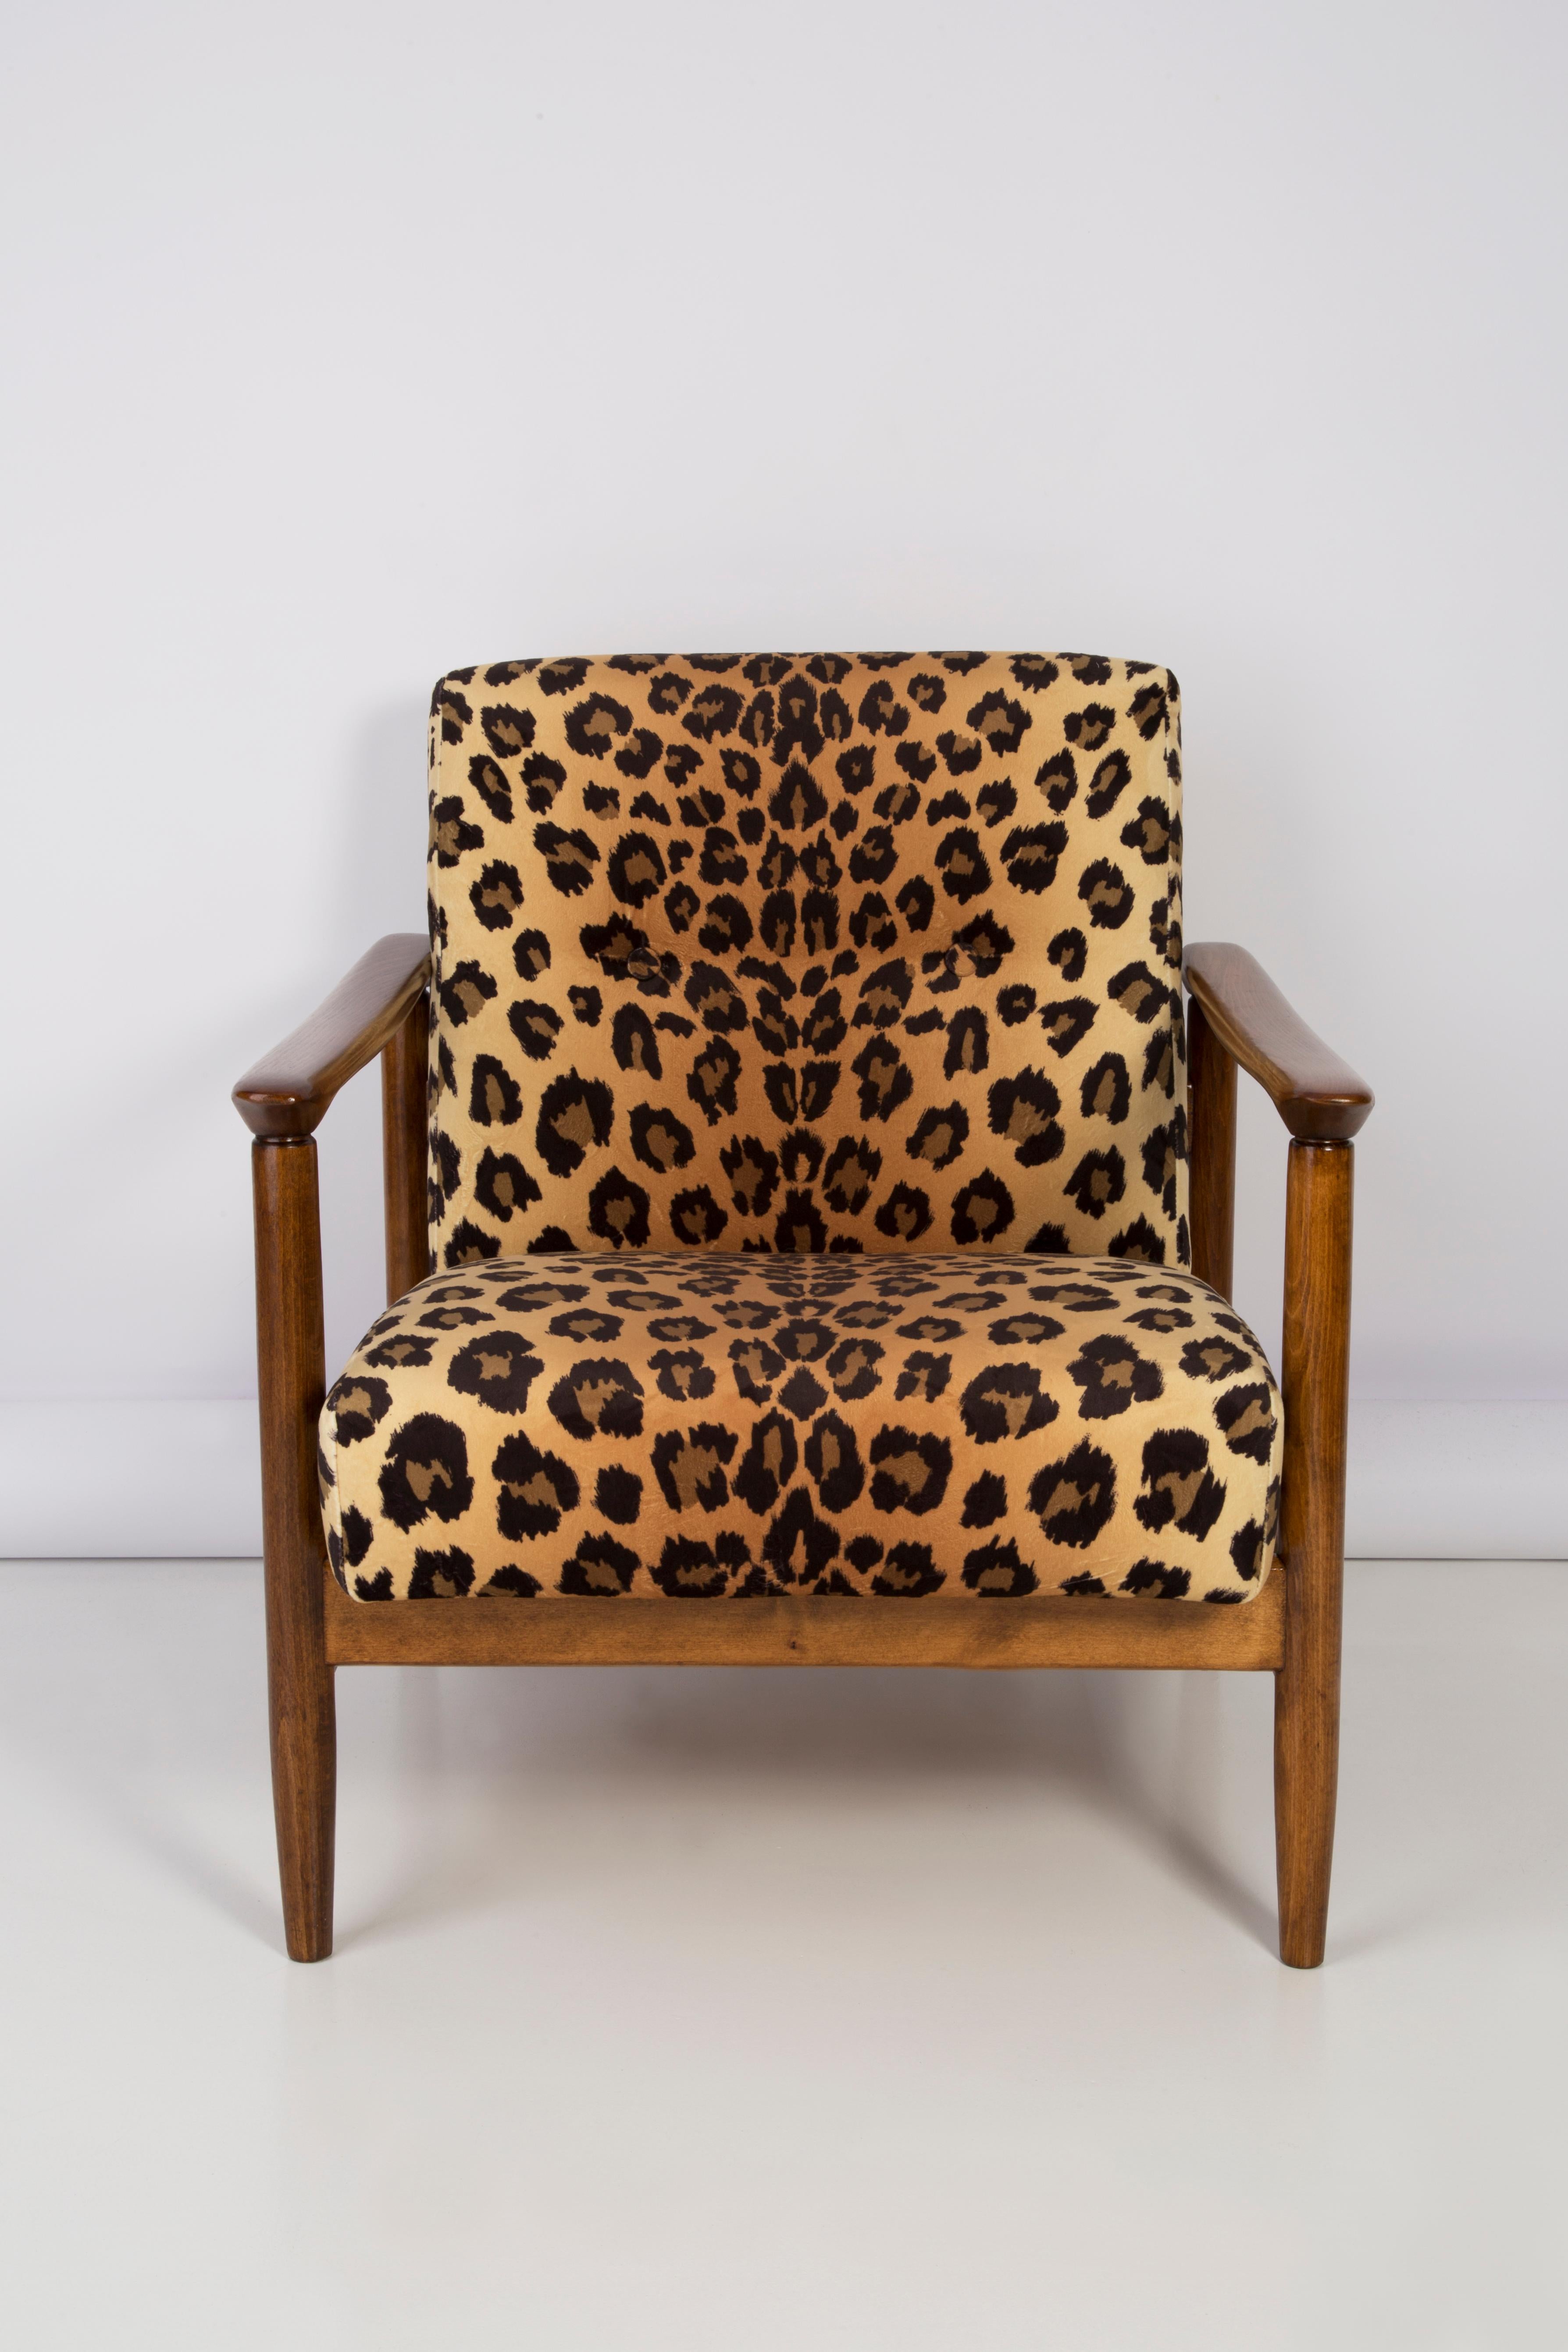 Hand-Crafted Set of Two Leopard Velvet Vintage Armchairs, Edmund Homa, 1960s, Poland For Sale